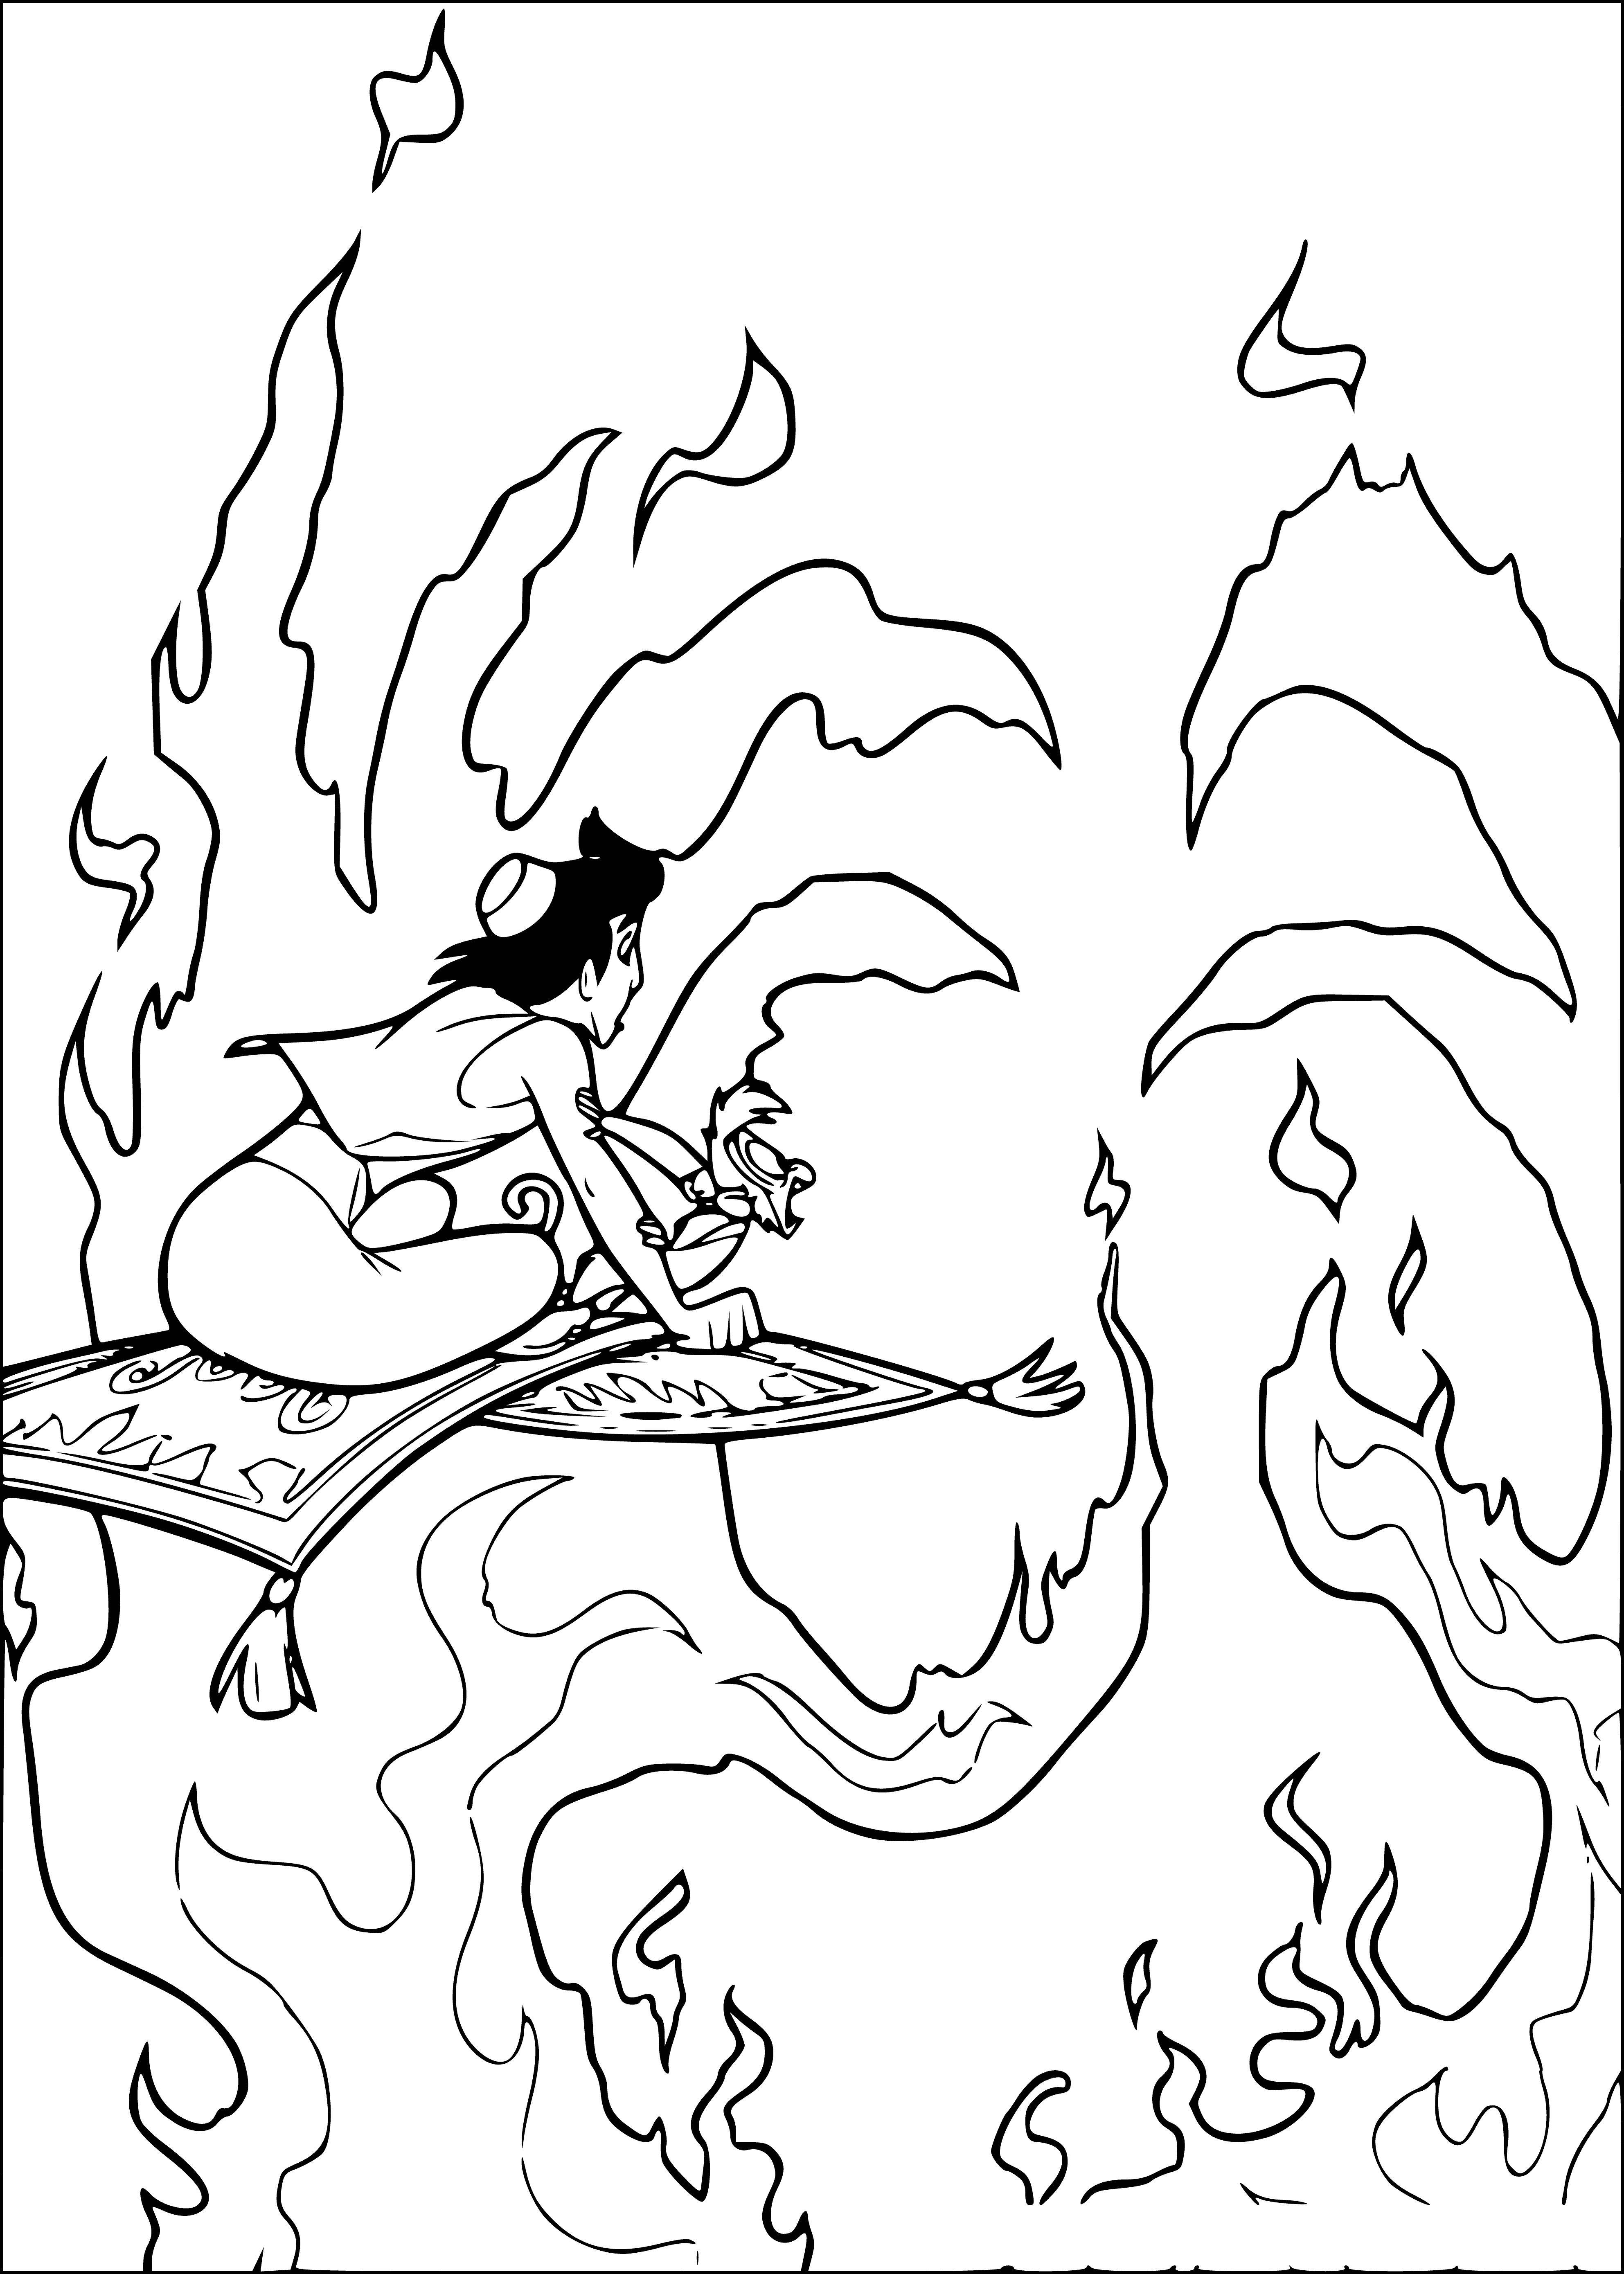 Wall of fire coloring page